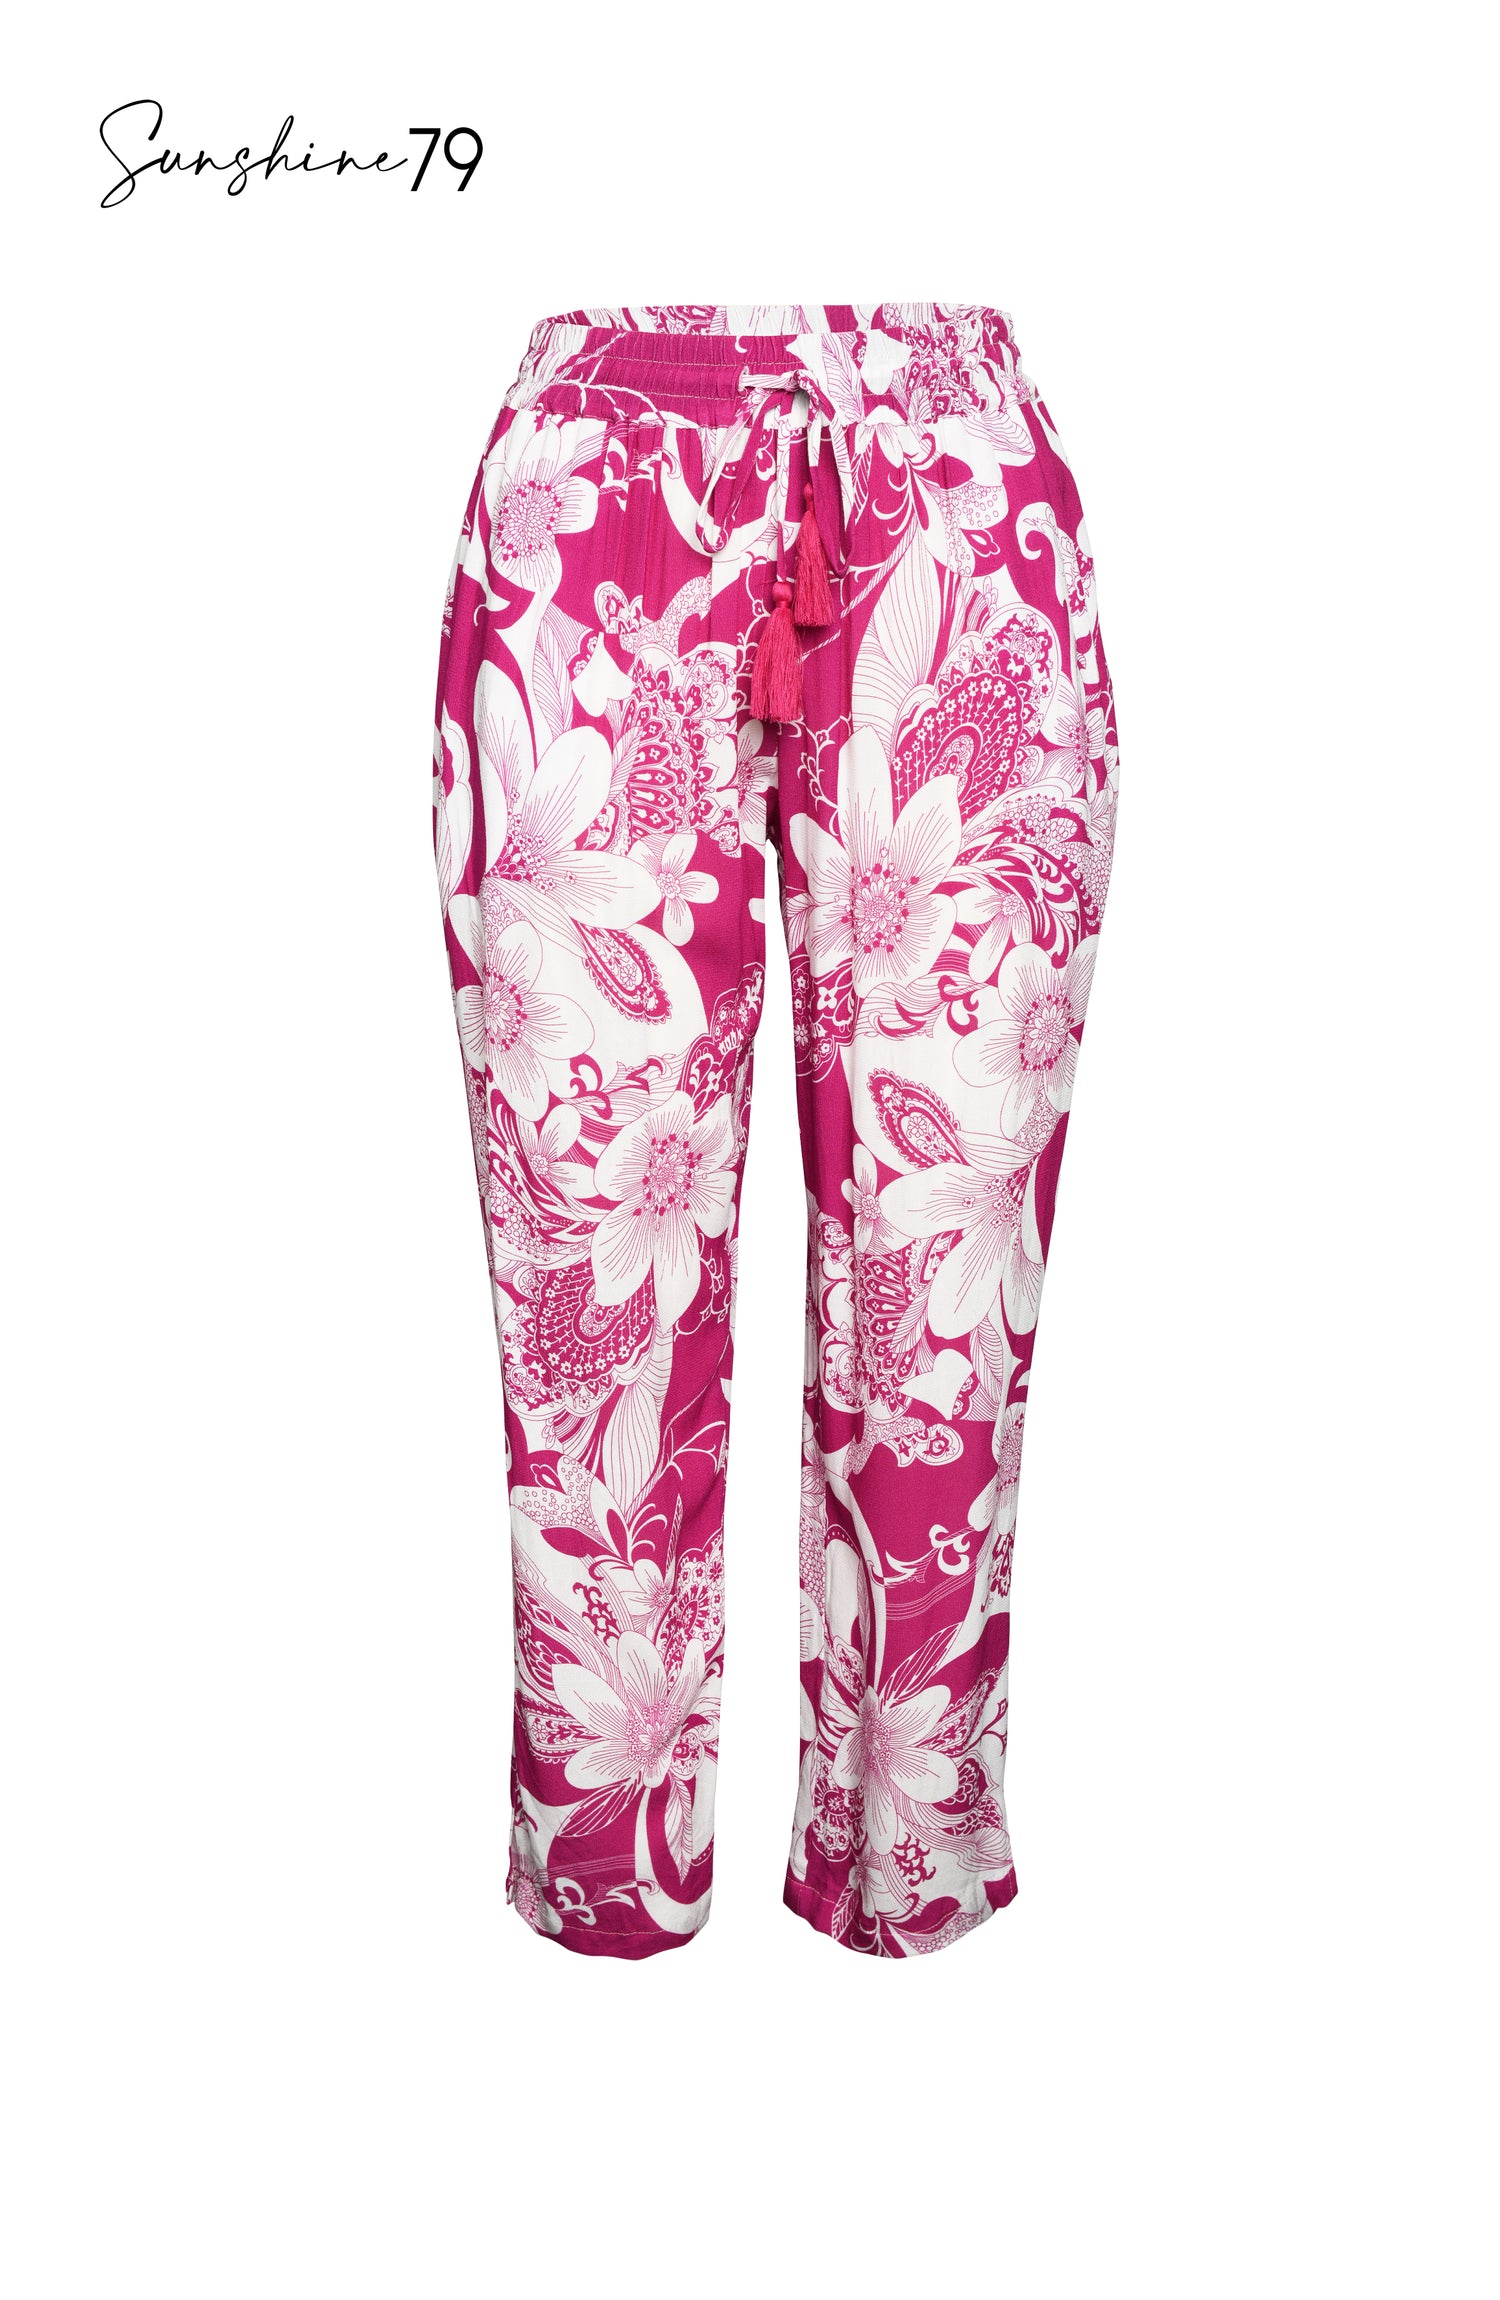 Pink and white floral beach pants